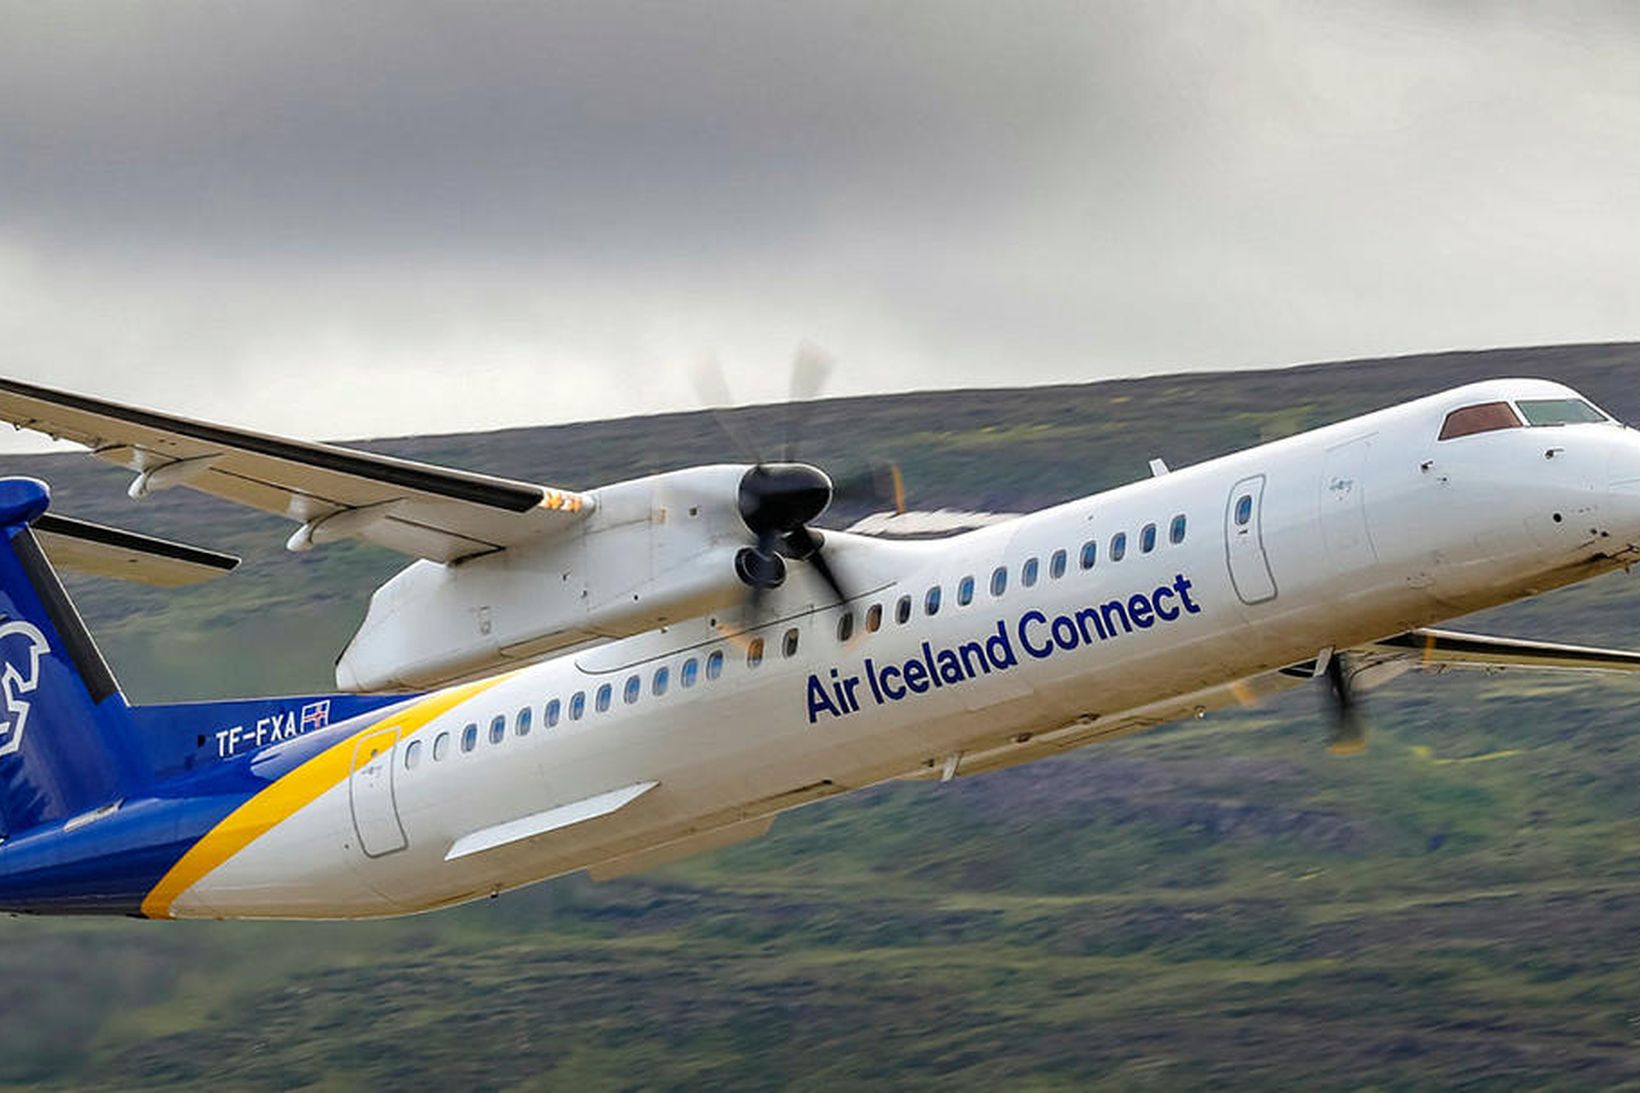 Air Iceland Connect.